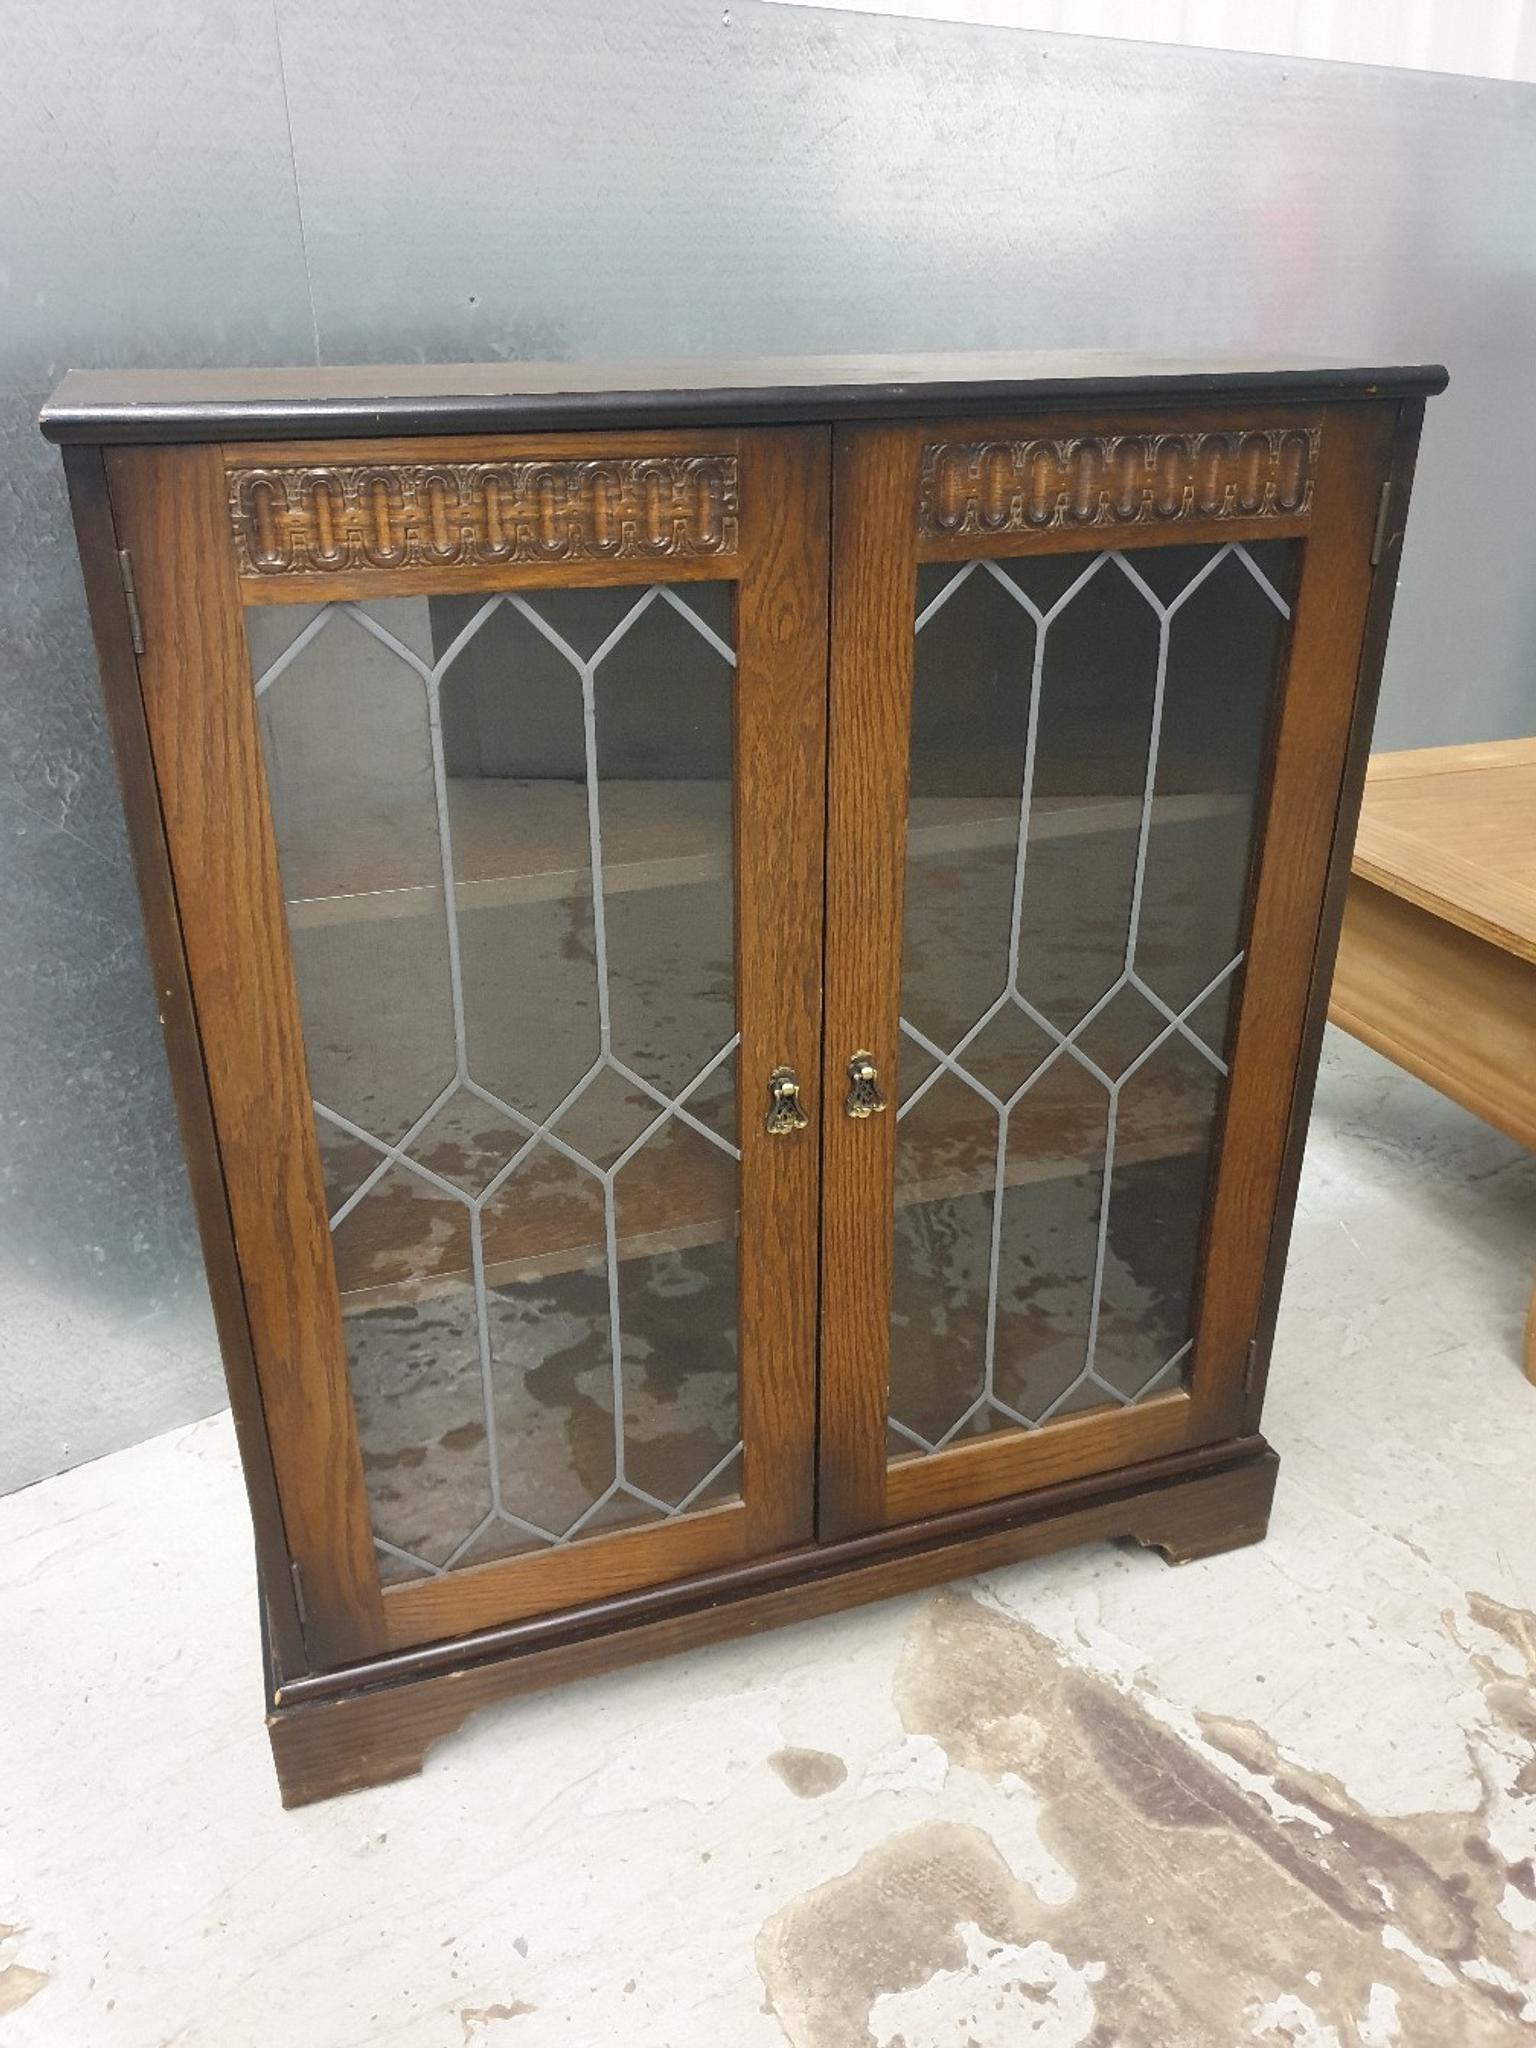 Vintage Lead Glass Door Display Cabinet In Dy8 Dudley For 35 00